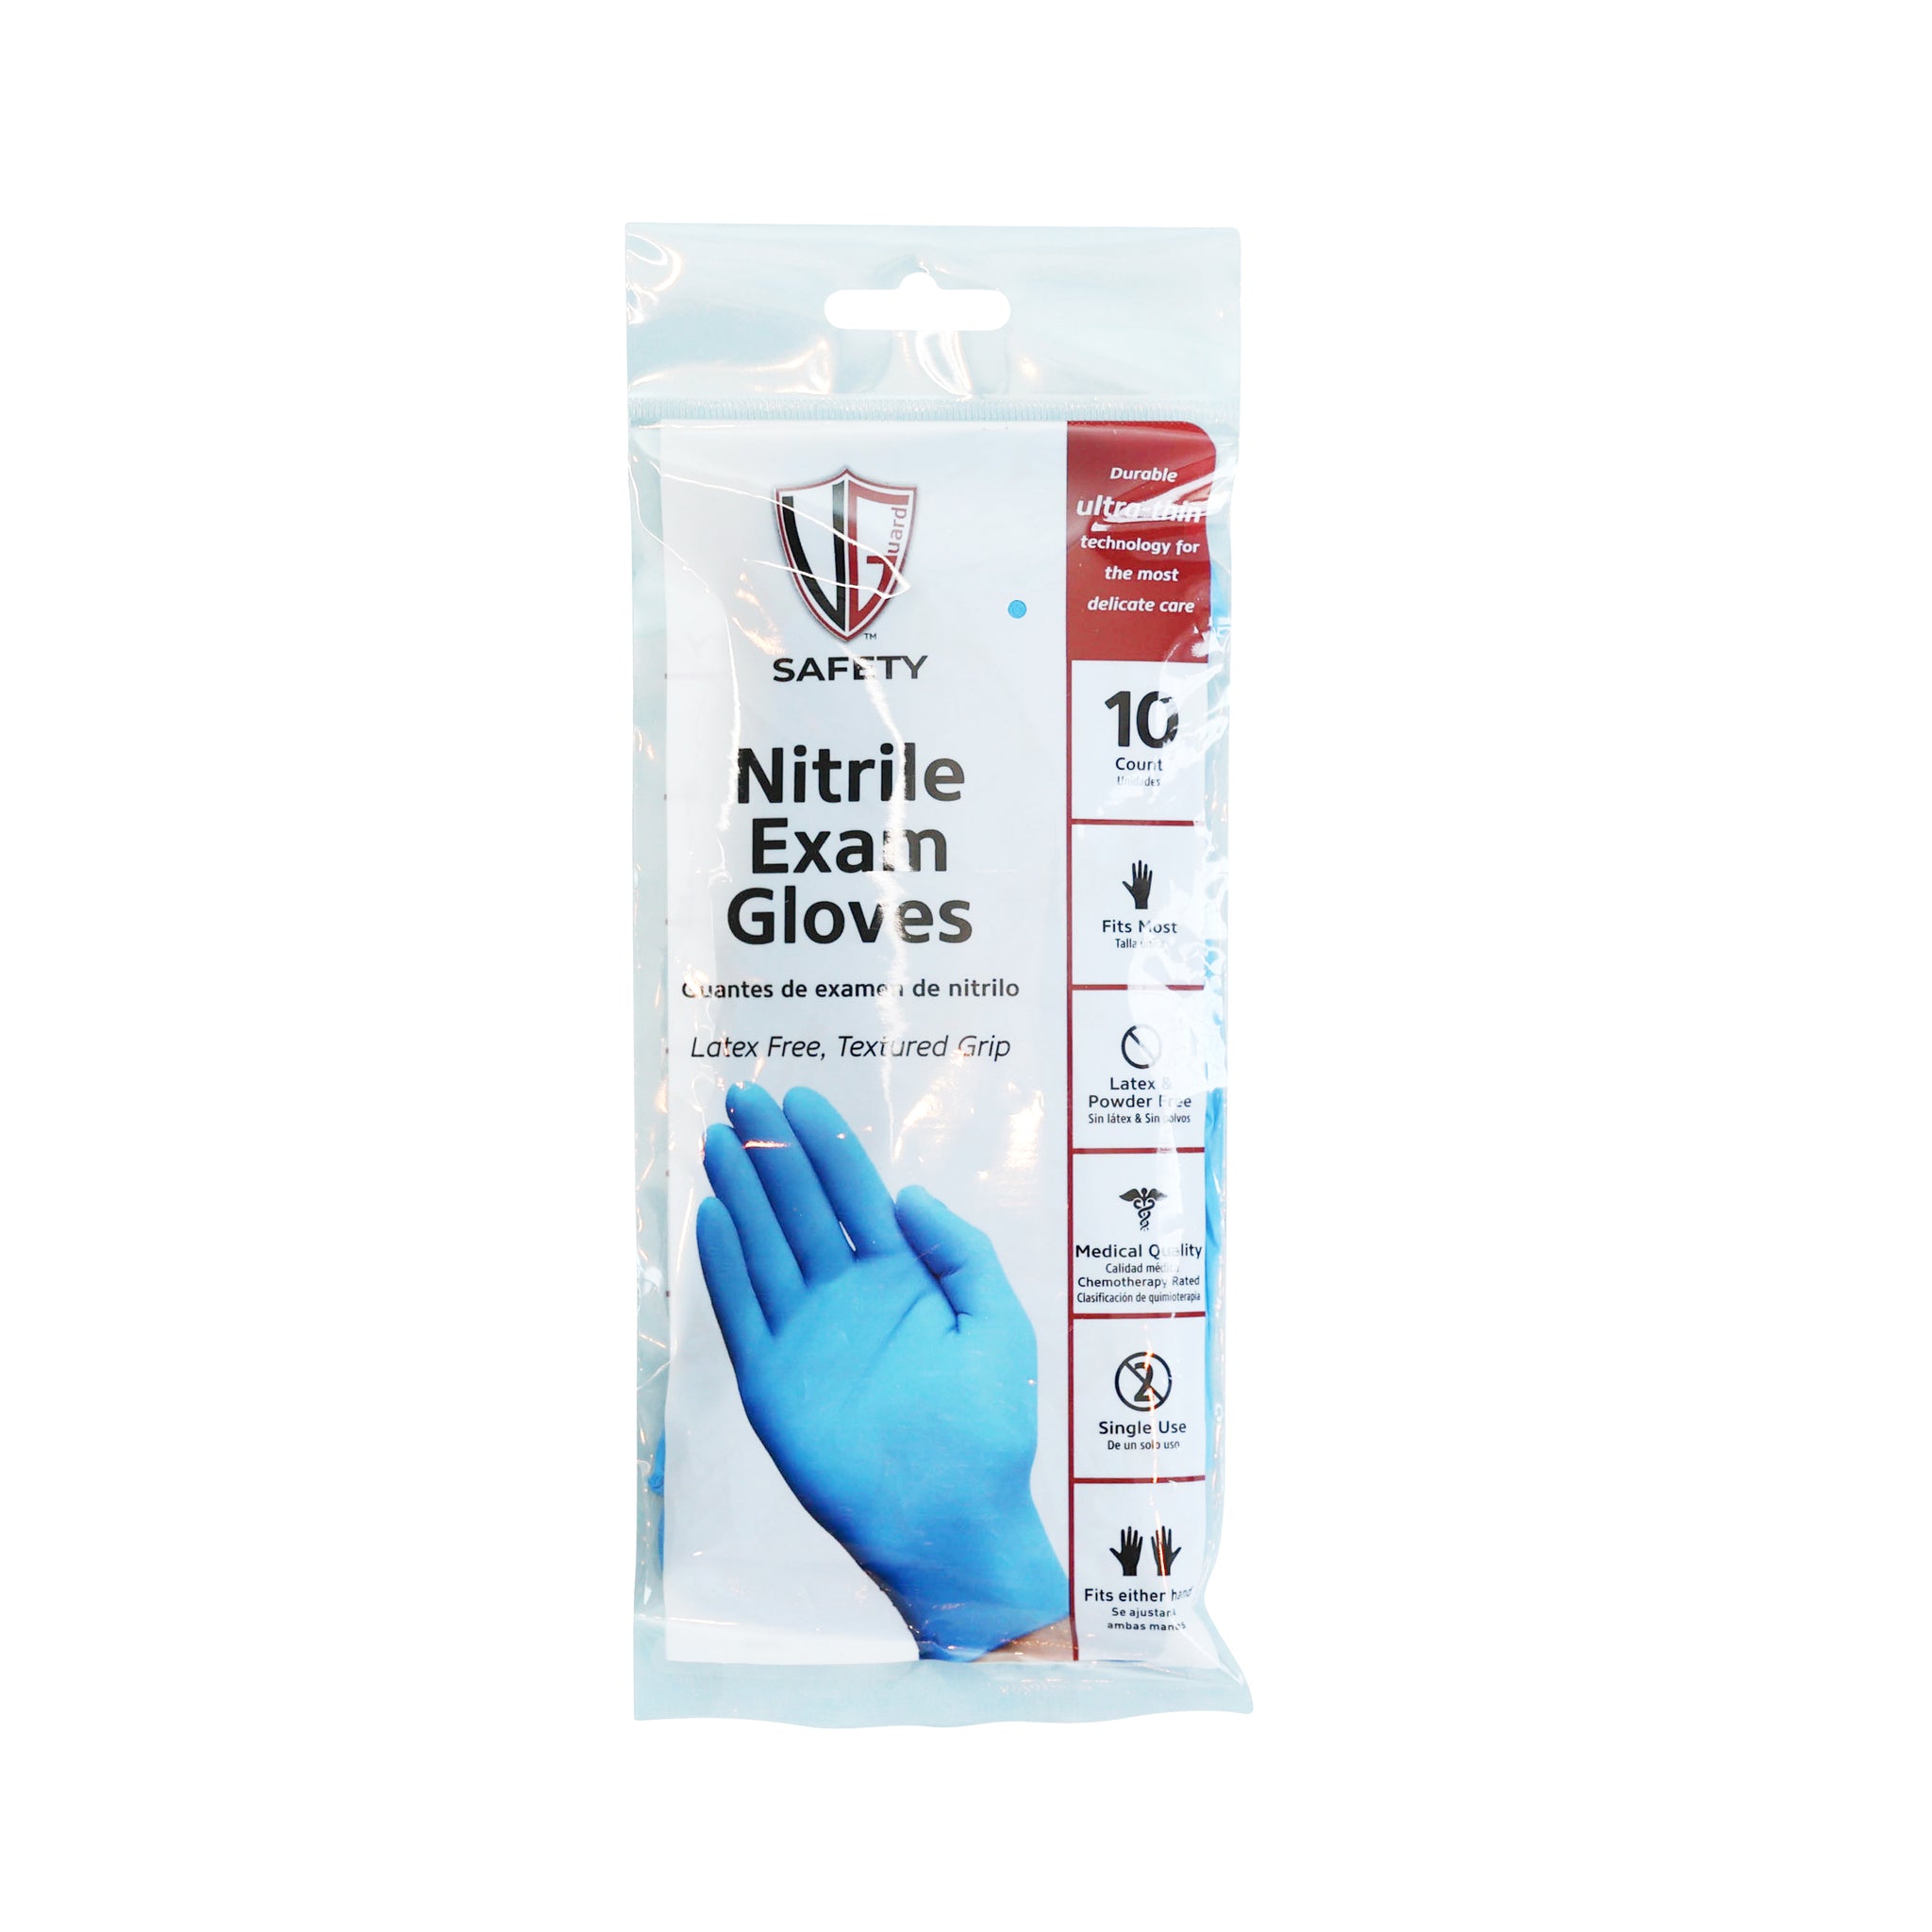 A11N1 Blue 3.5 mil Nitrile Chemo Exam Retail Pack Disposable Gloves